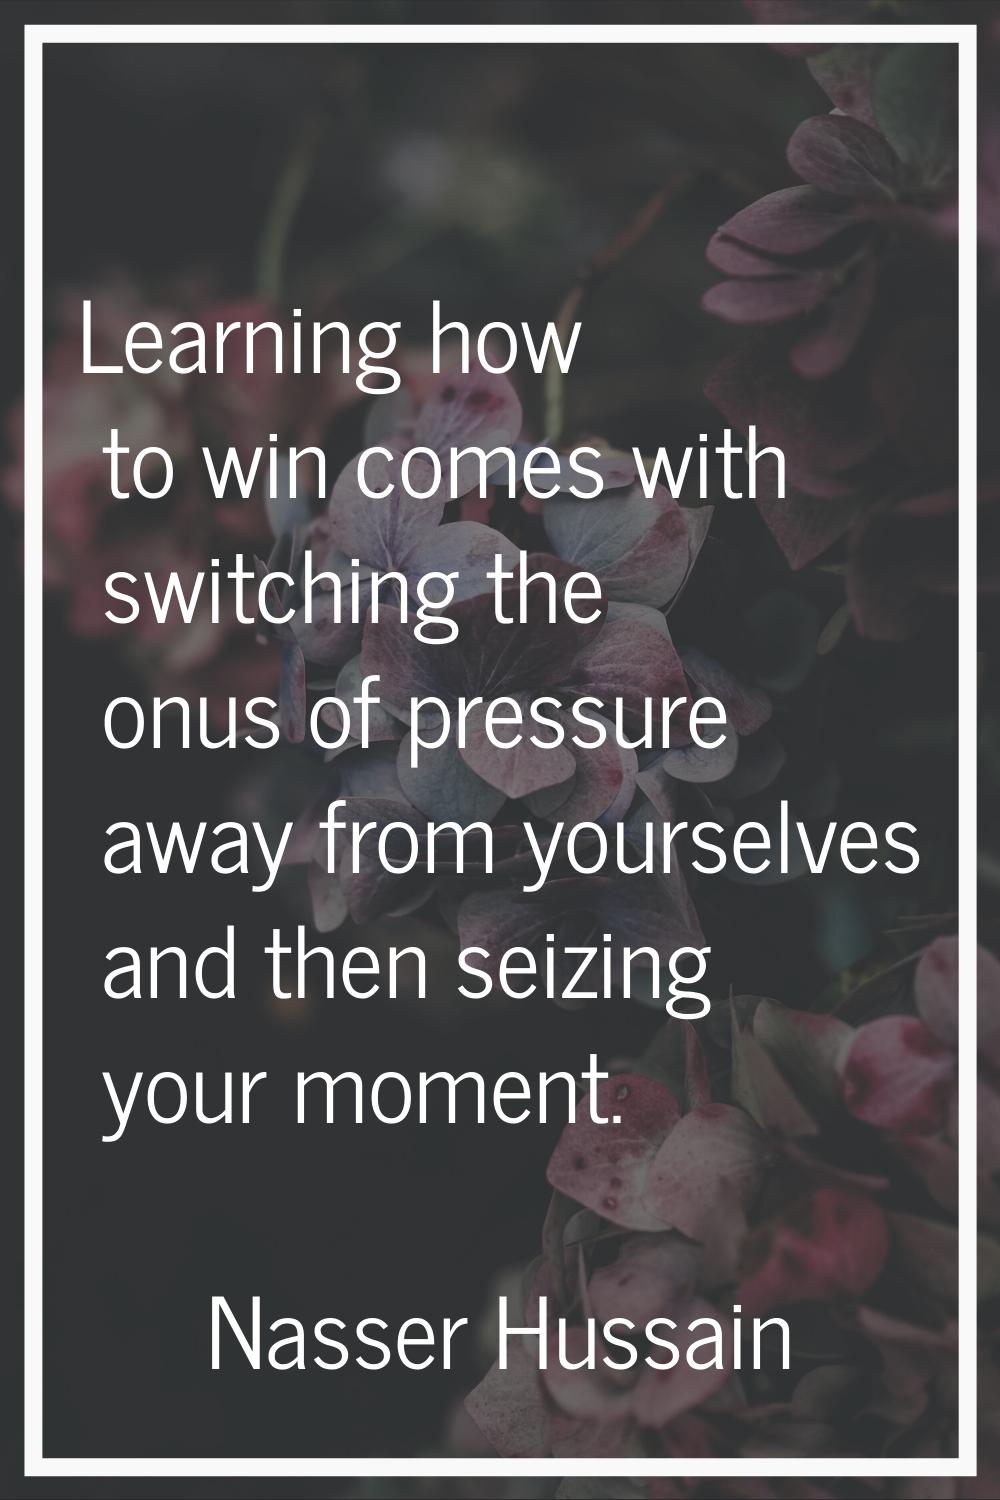 Learning how to win comes with switching the onus of pressure away from yourselves and then seizing